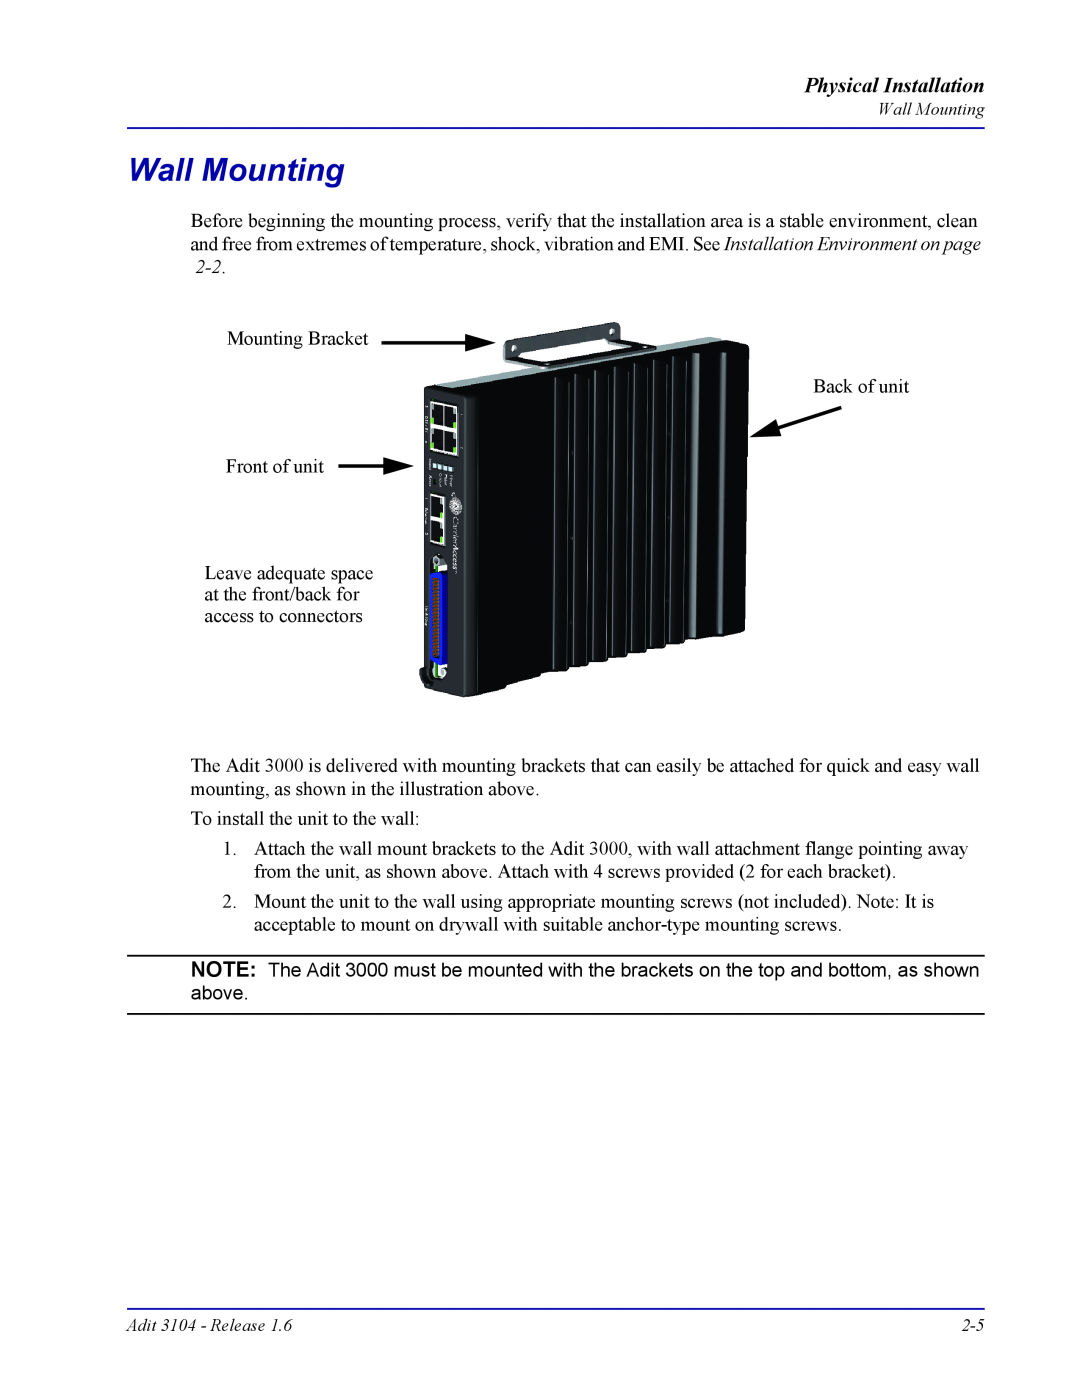 Carrier Access Adit 3104 user manual Wall Mounting, Physical Installation 